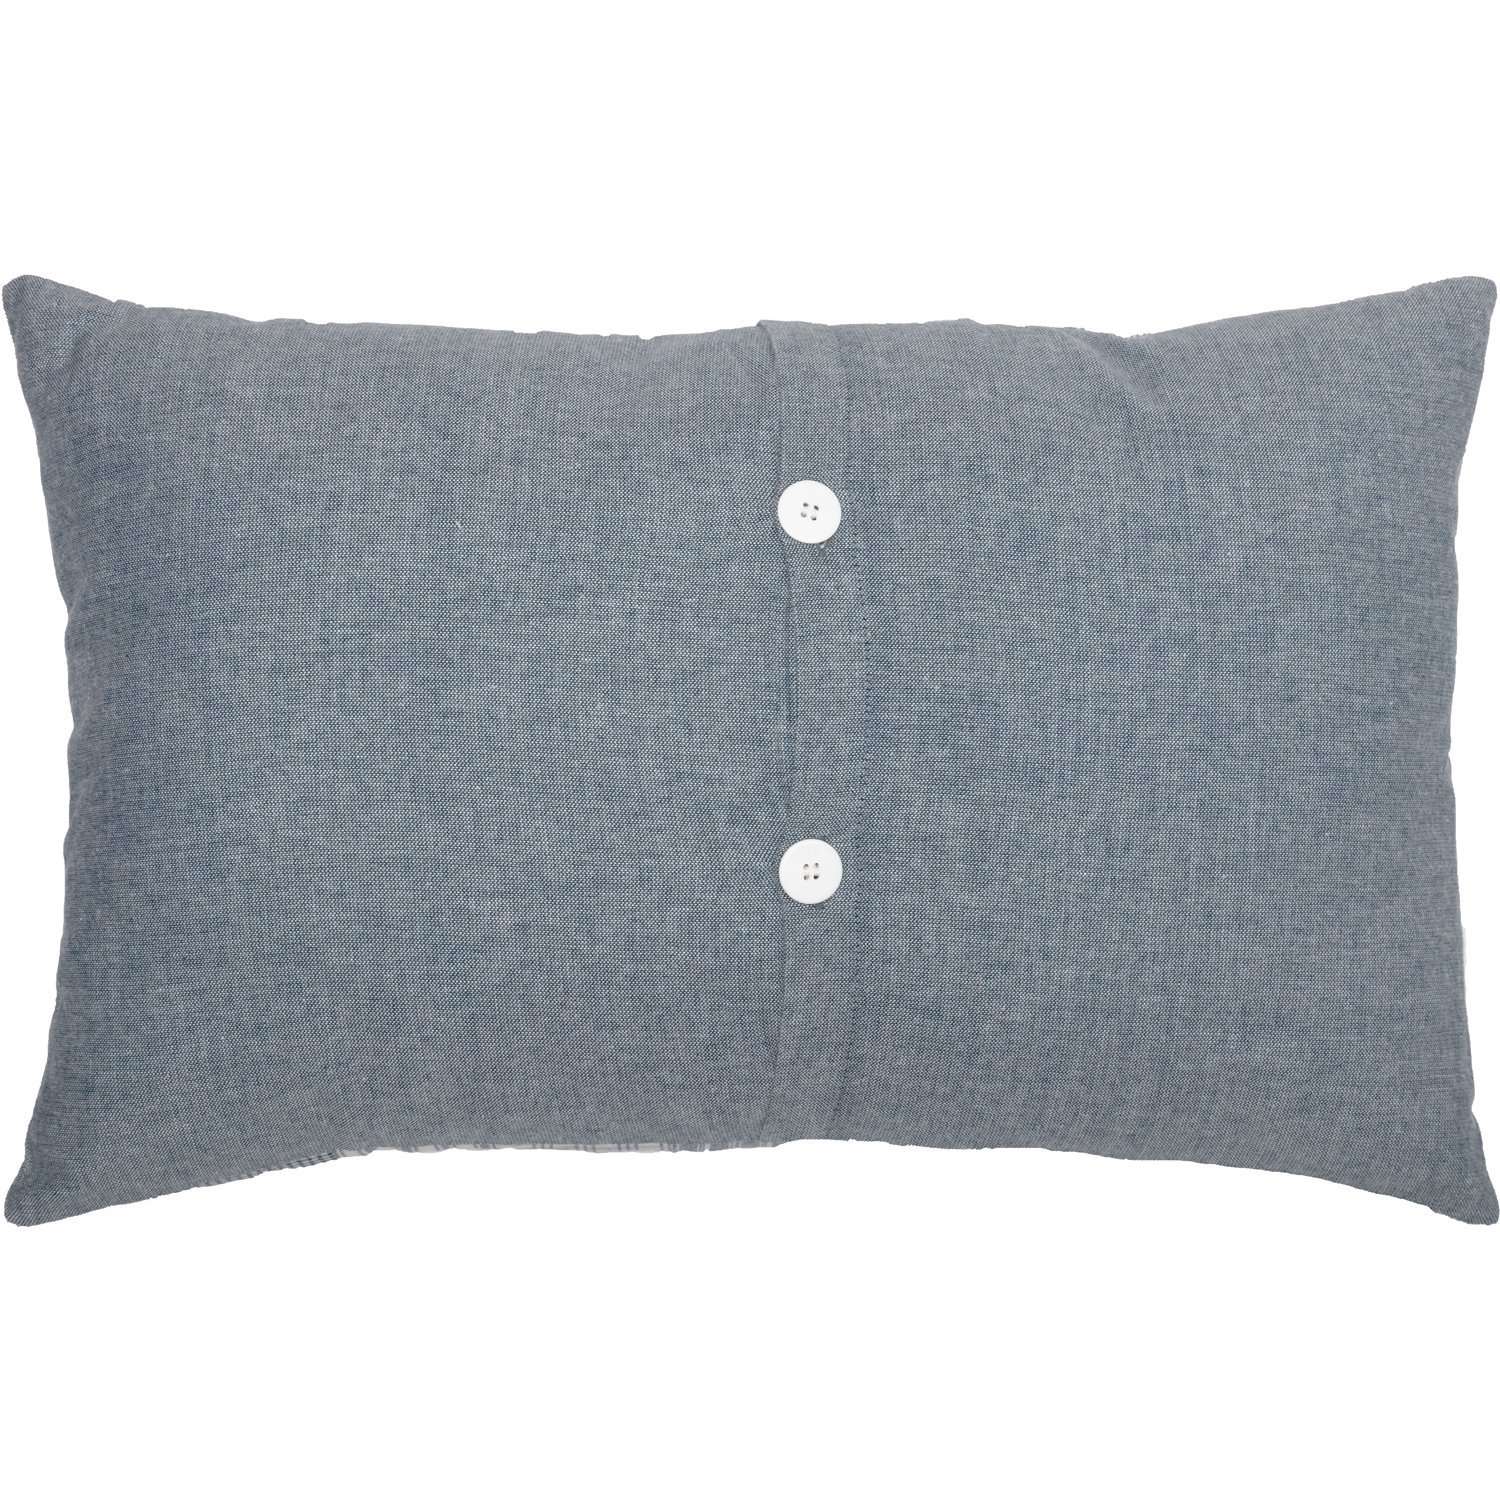 Sawyer Mill Family Pillow Charcoal, Red & Blue Pillows VHC Brands 